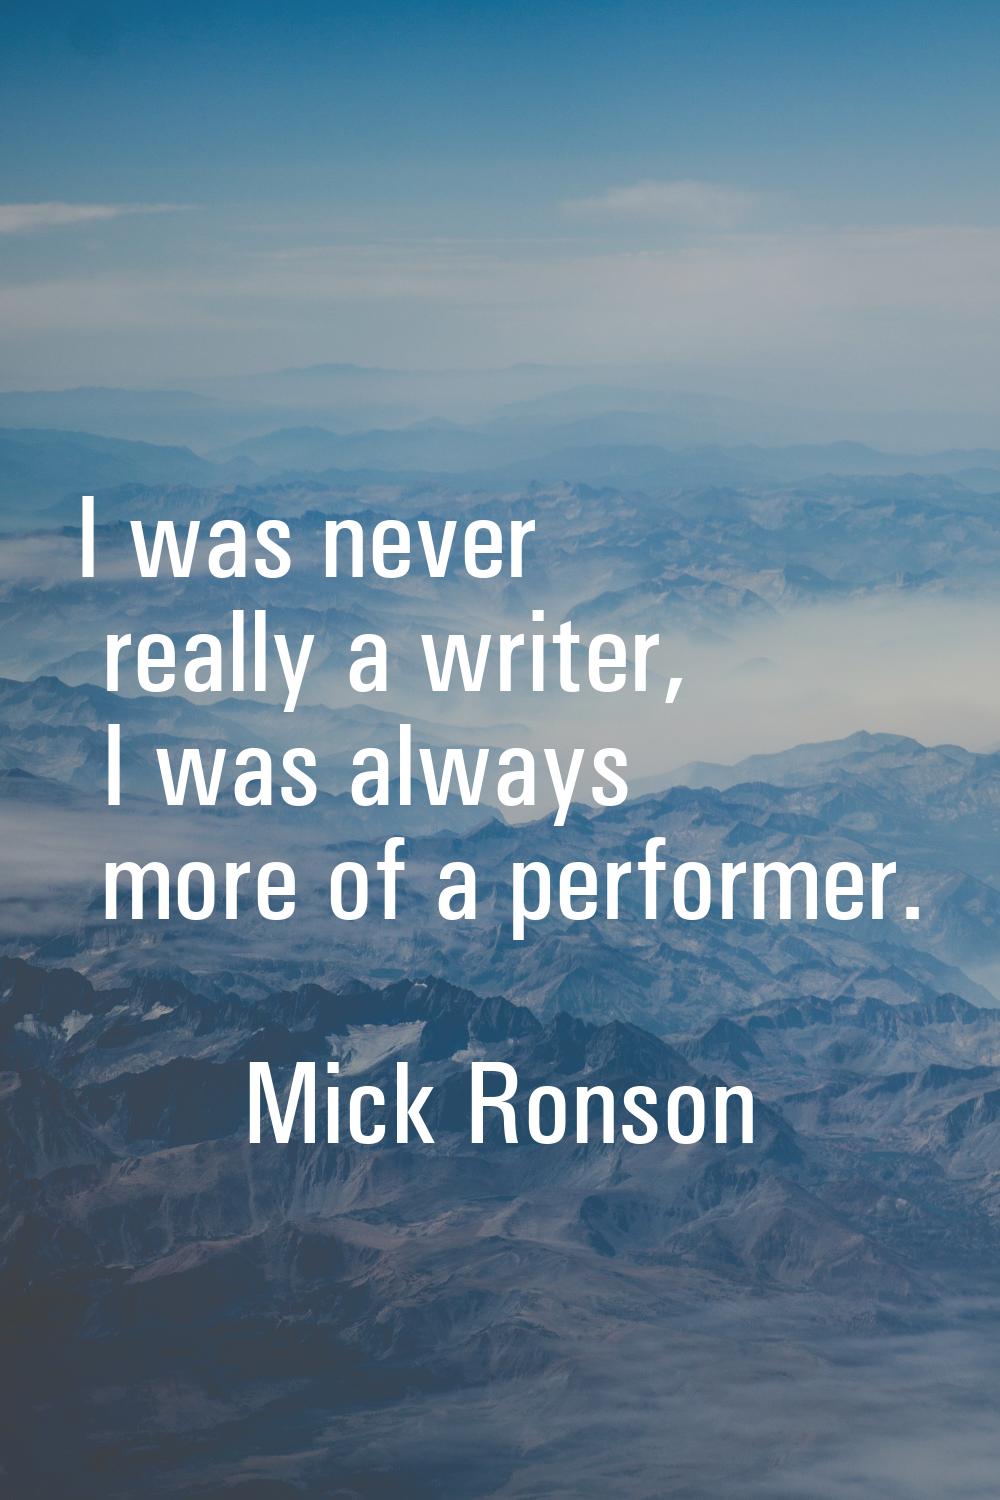 I was never really a writer, I was always more of a performer.